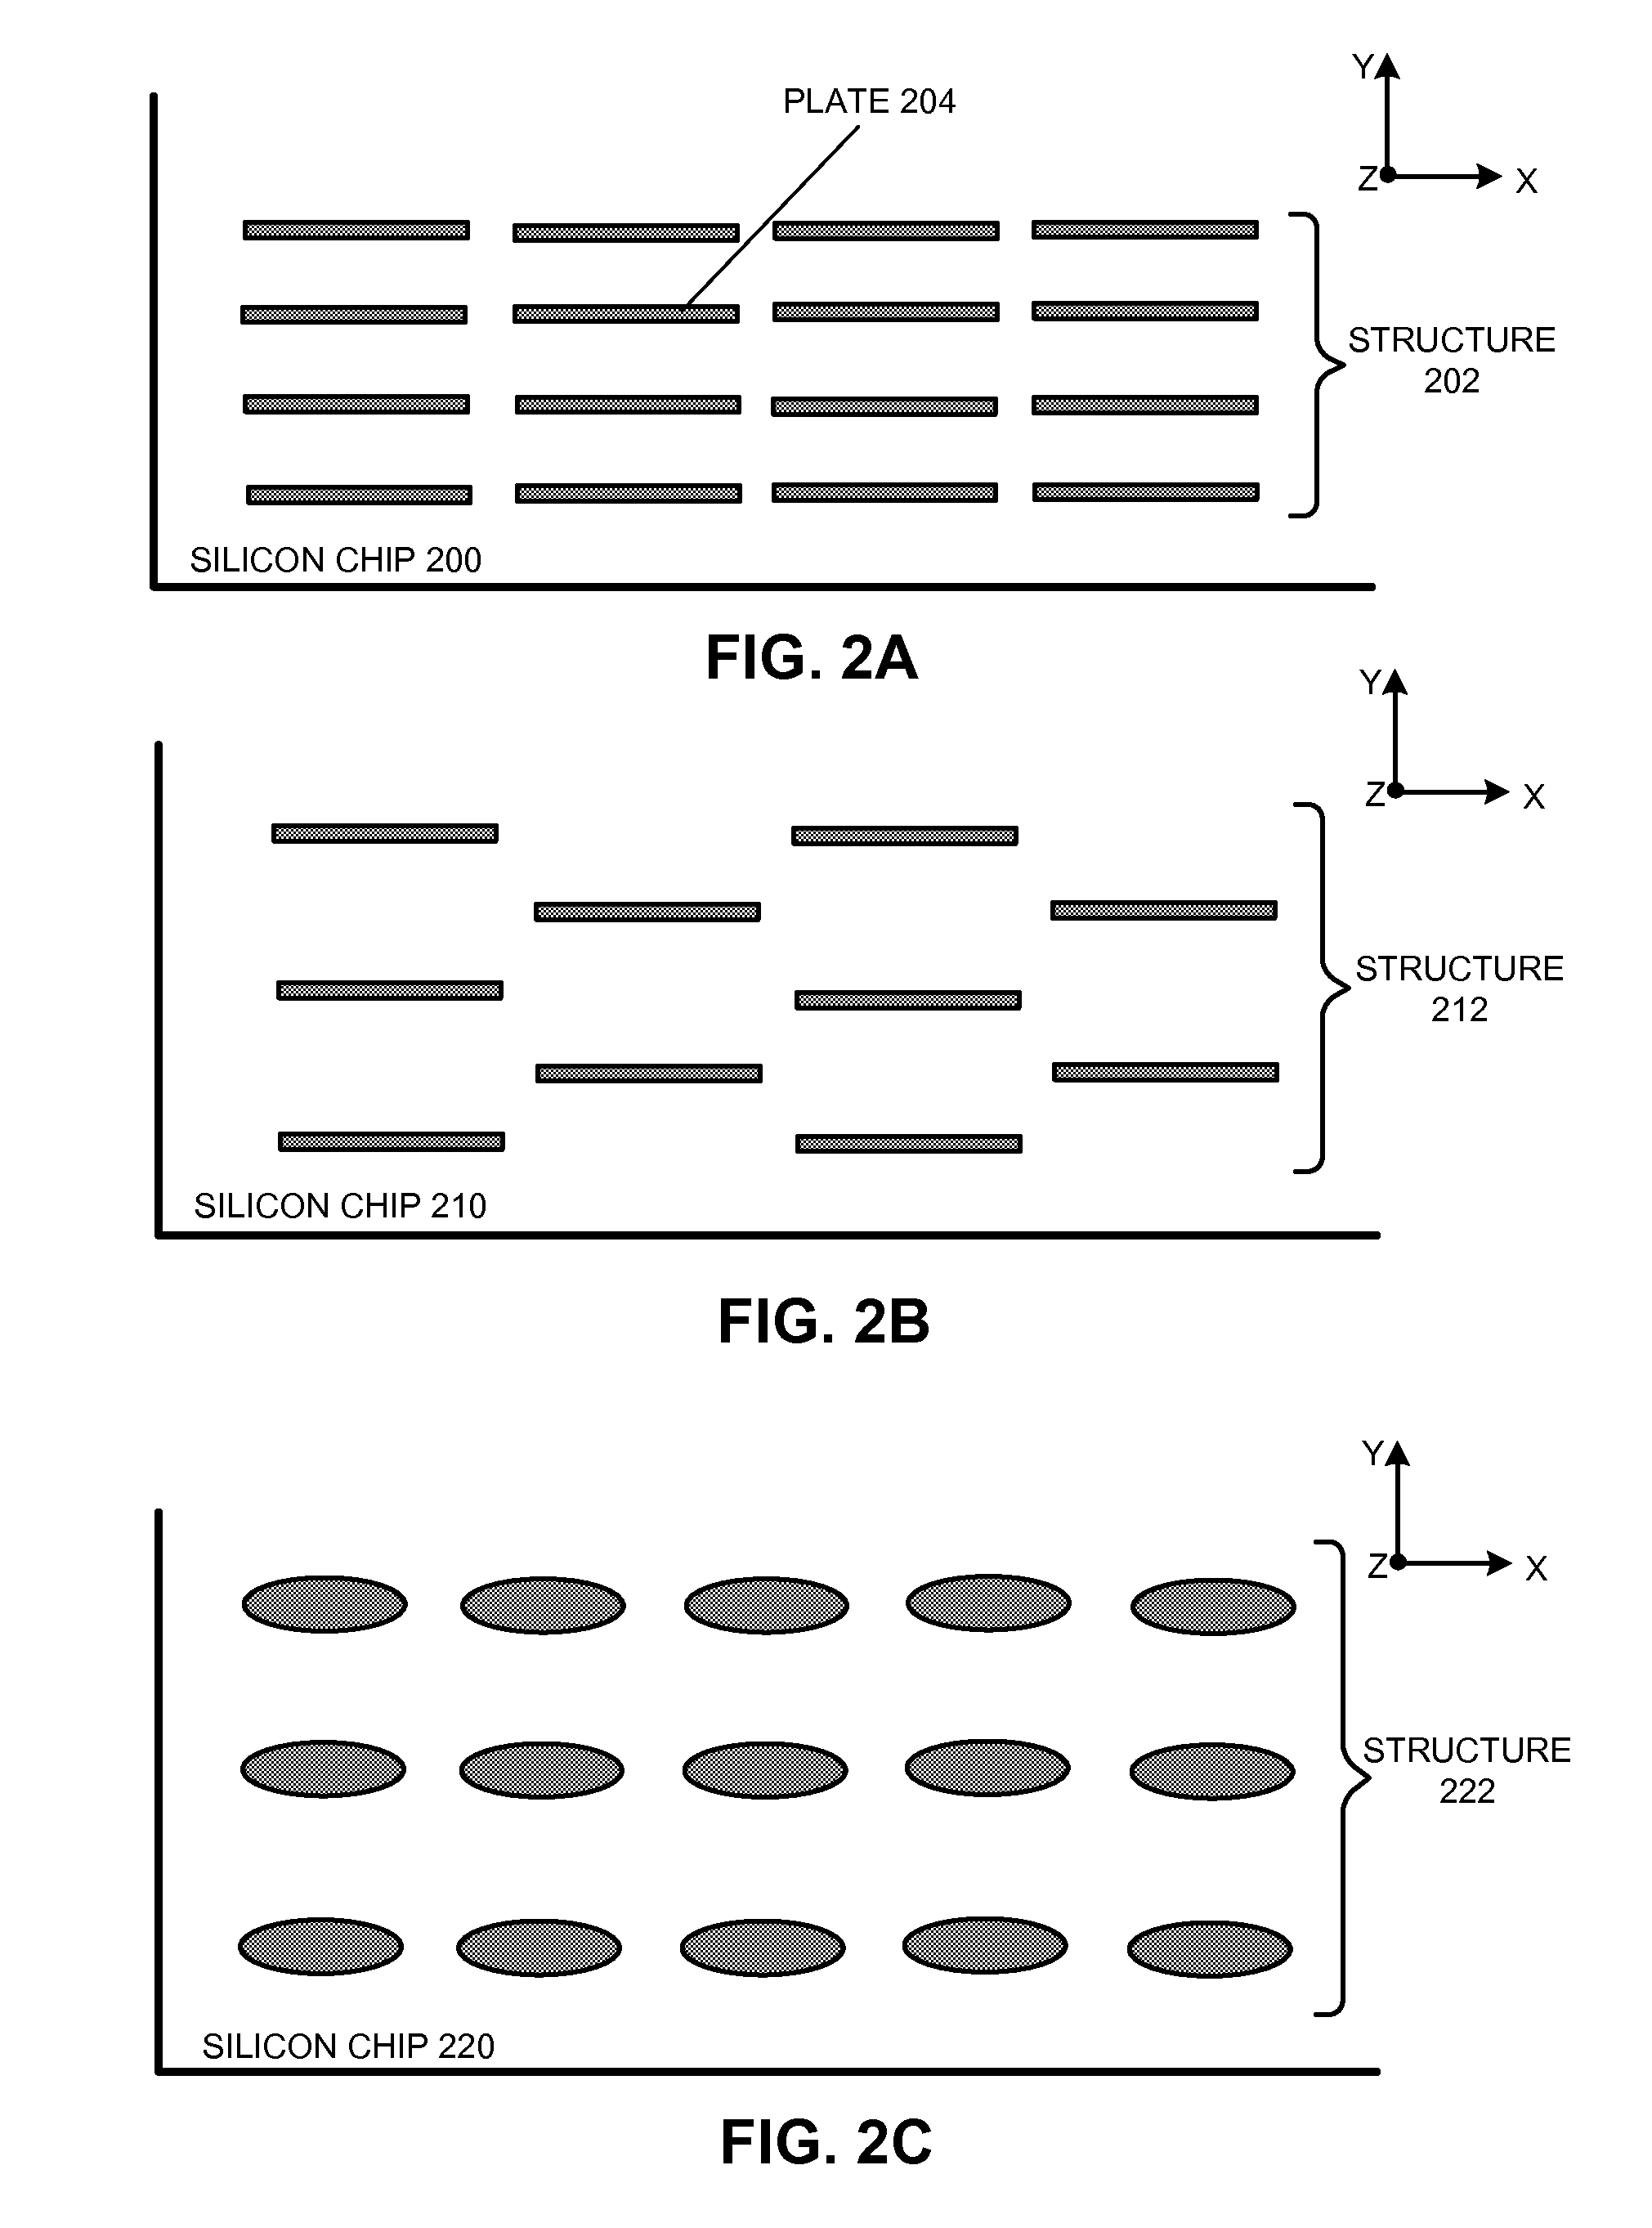 Design of a heat dissipation structure for an integrated circuit (IC) chip